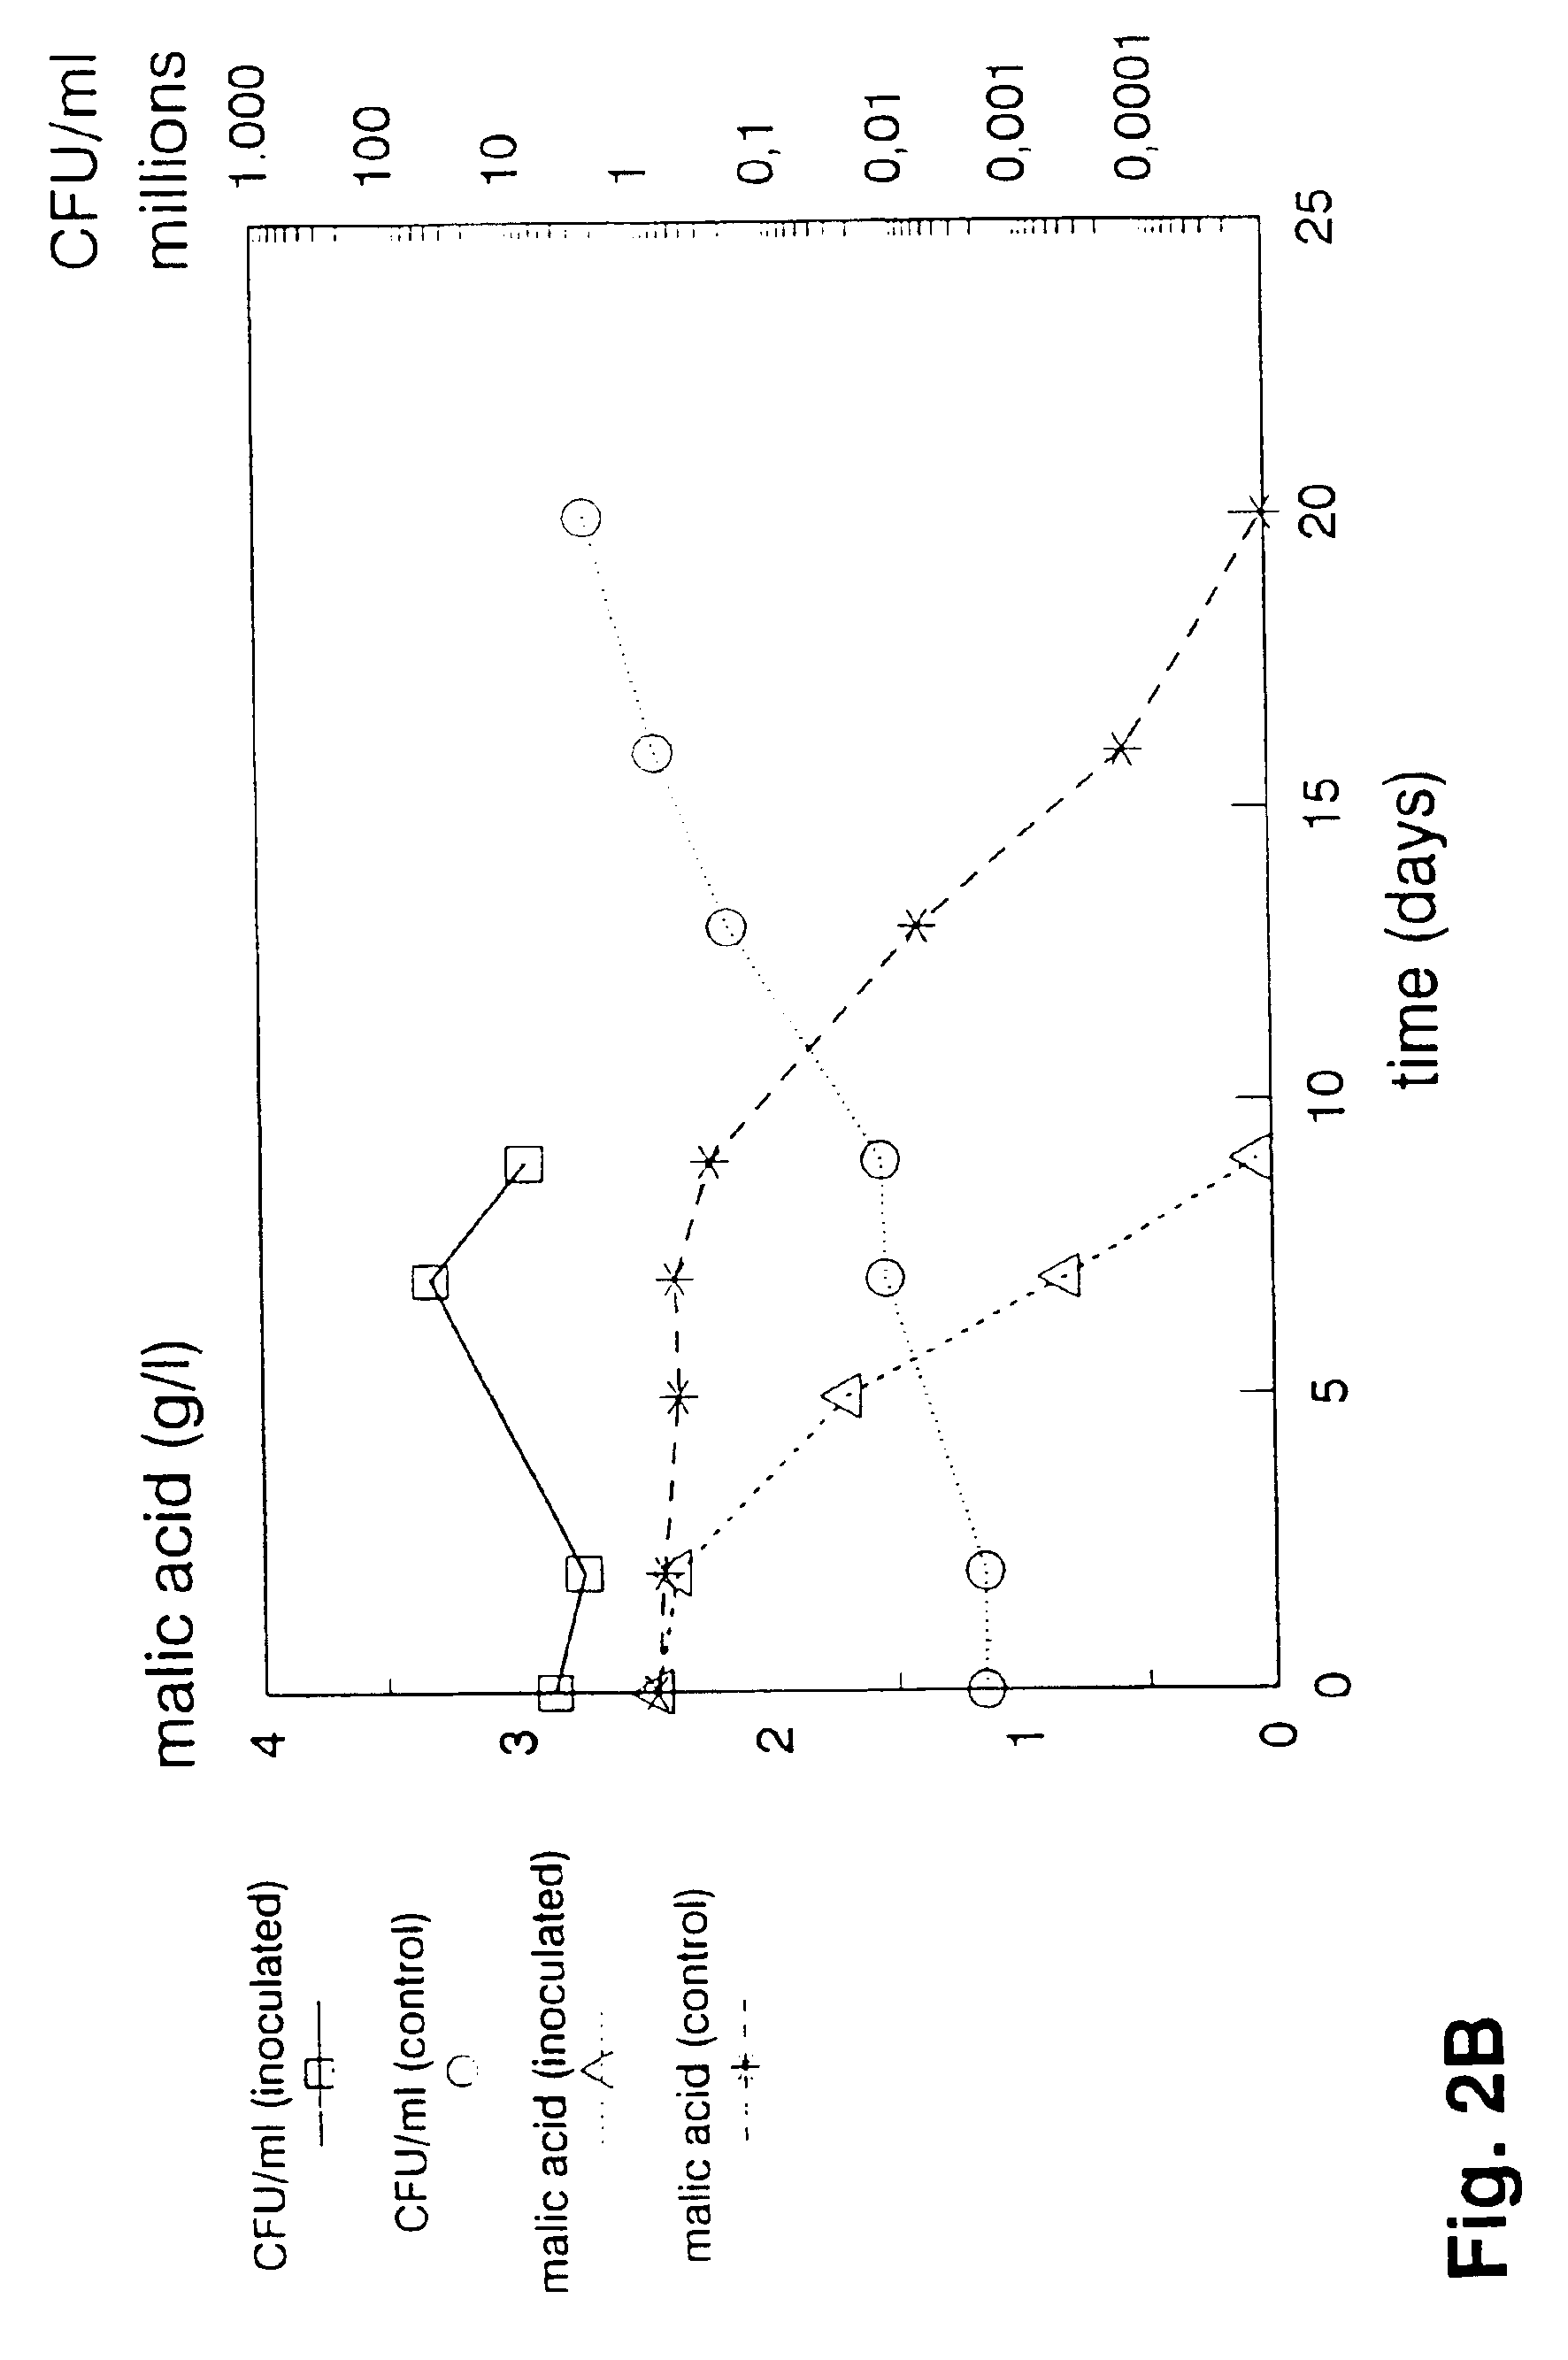 Method of inducing malolactic fermentation in wine or fruit juice by direct inoculation with a non-activated started culture